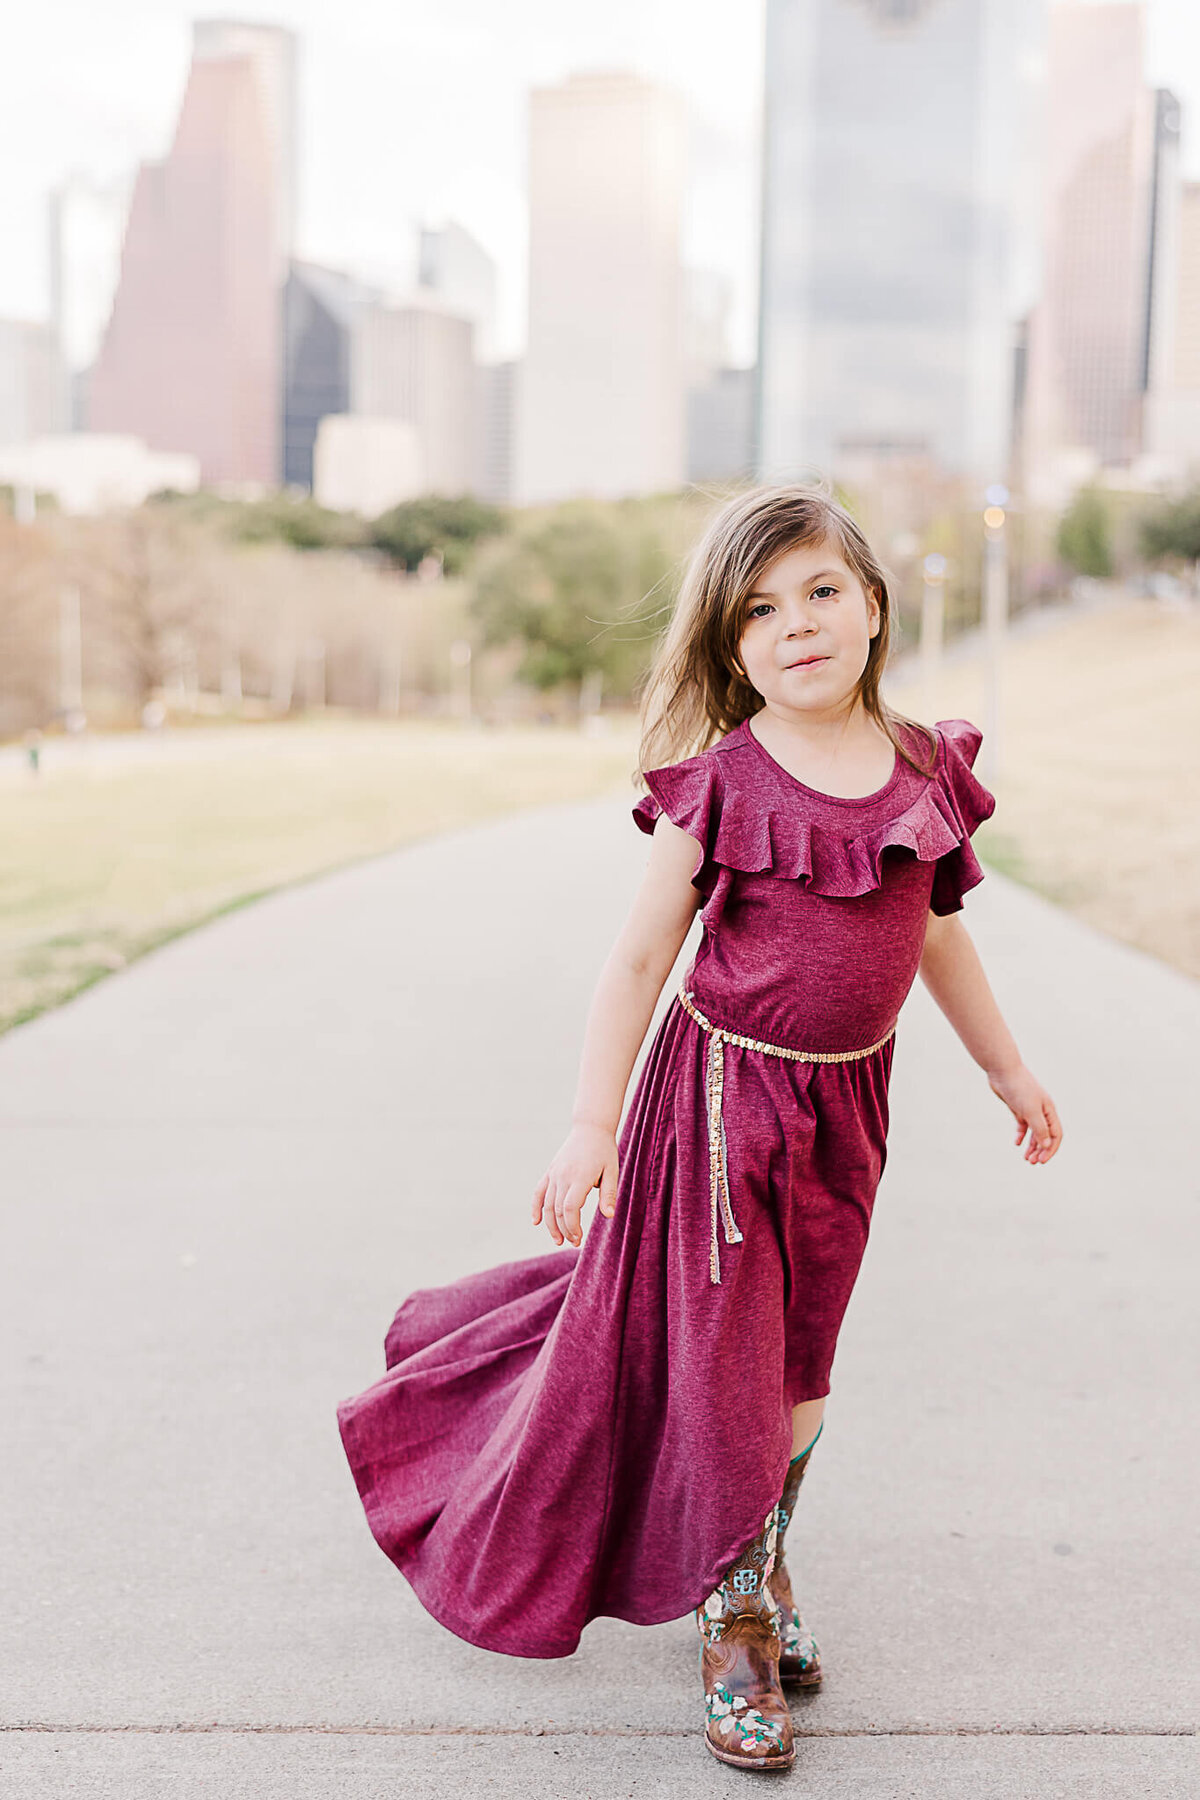 Young girl walking with purple dress on